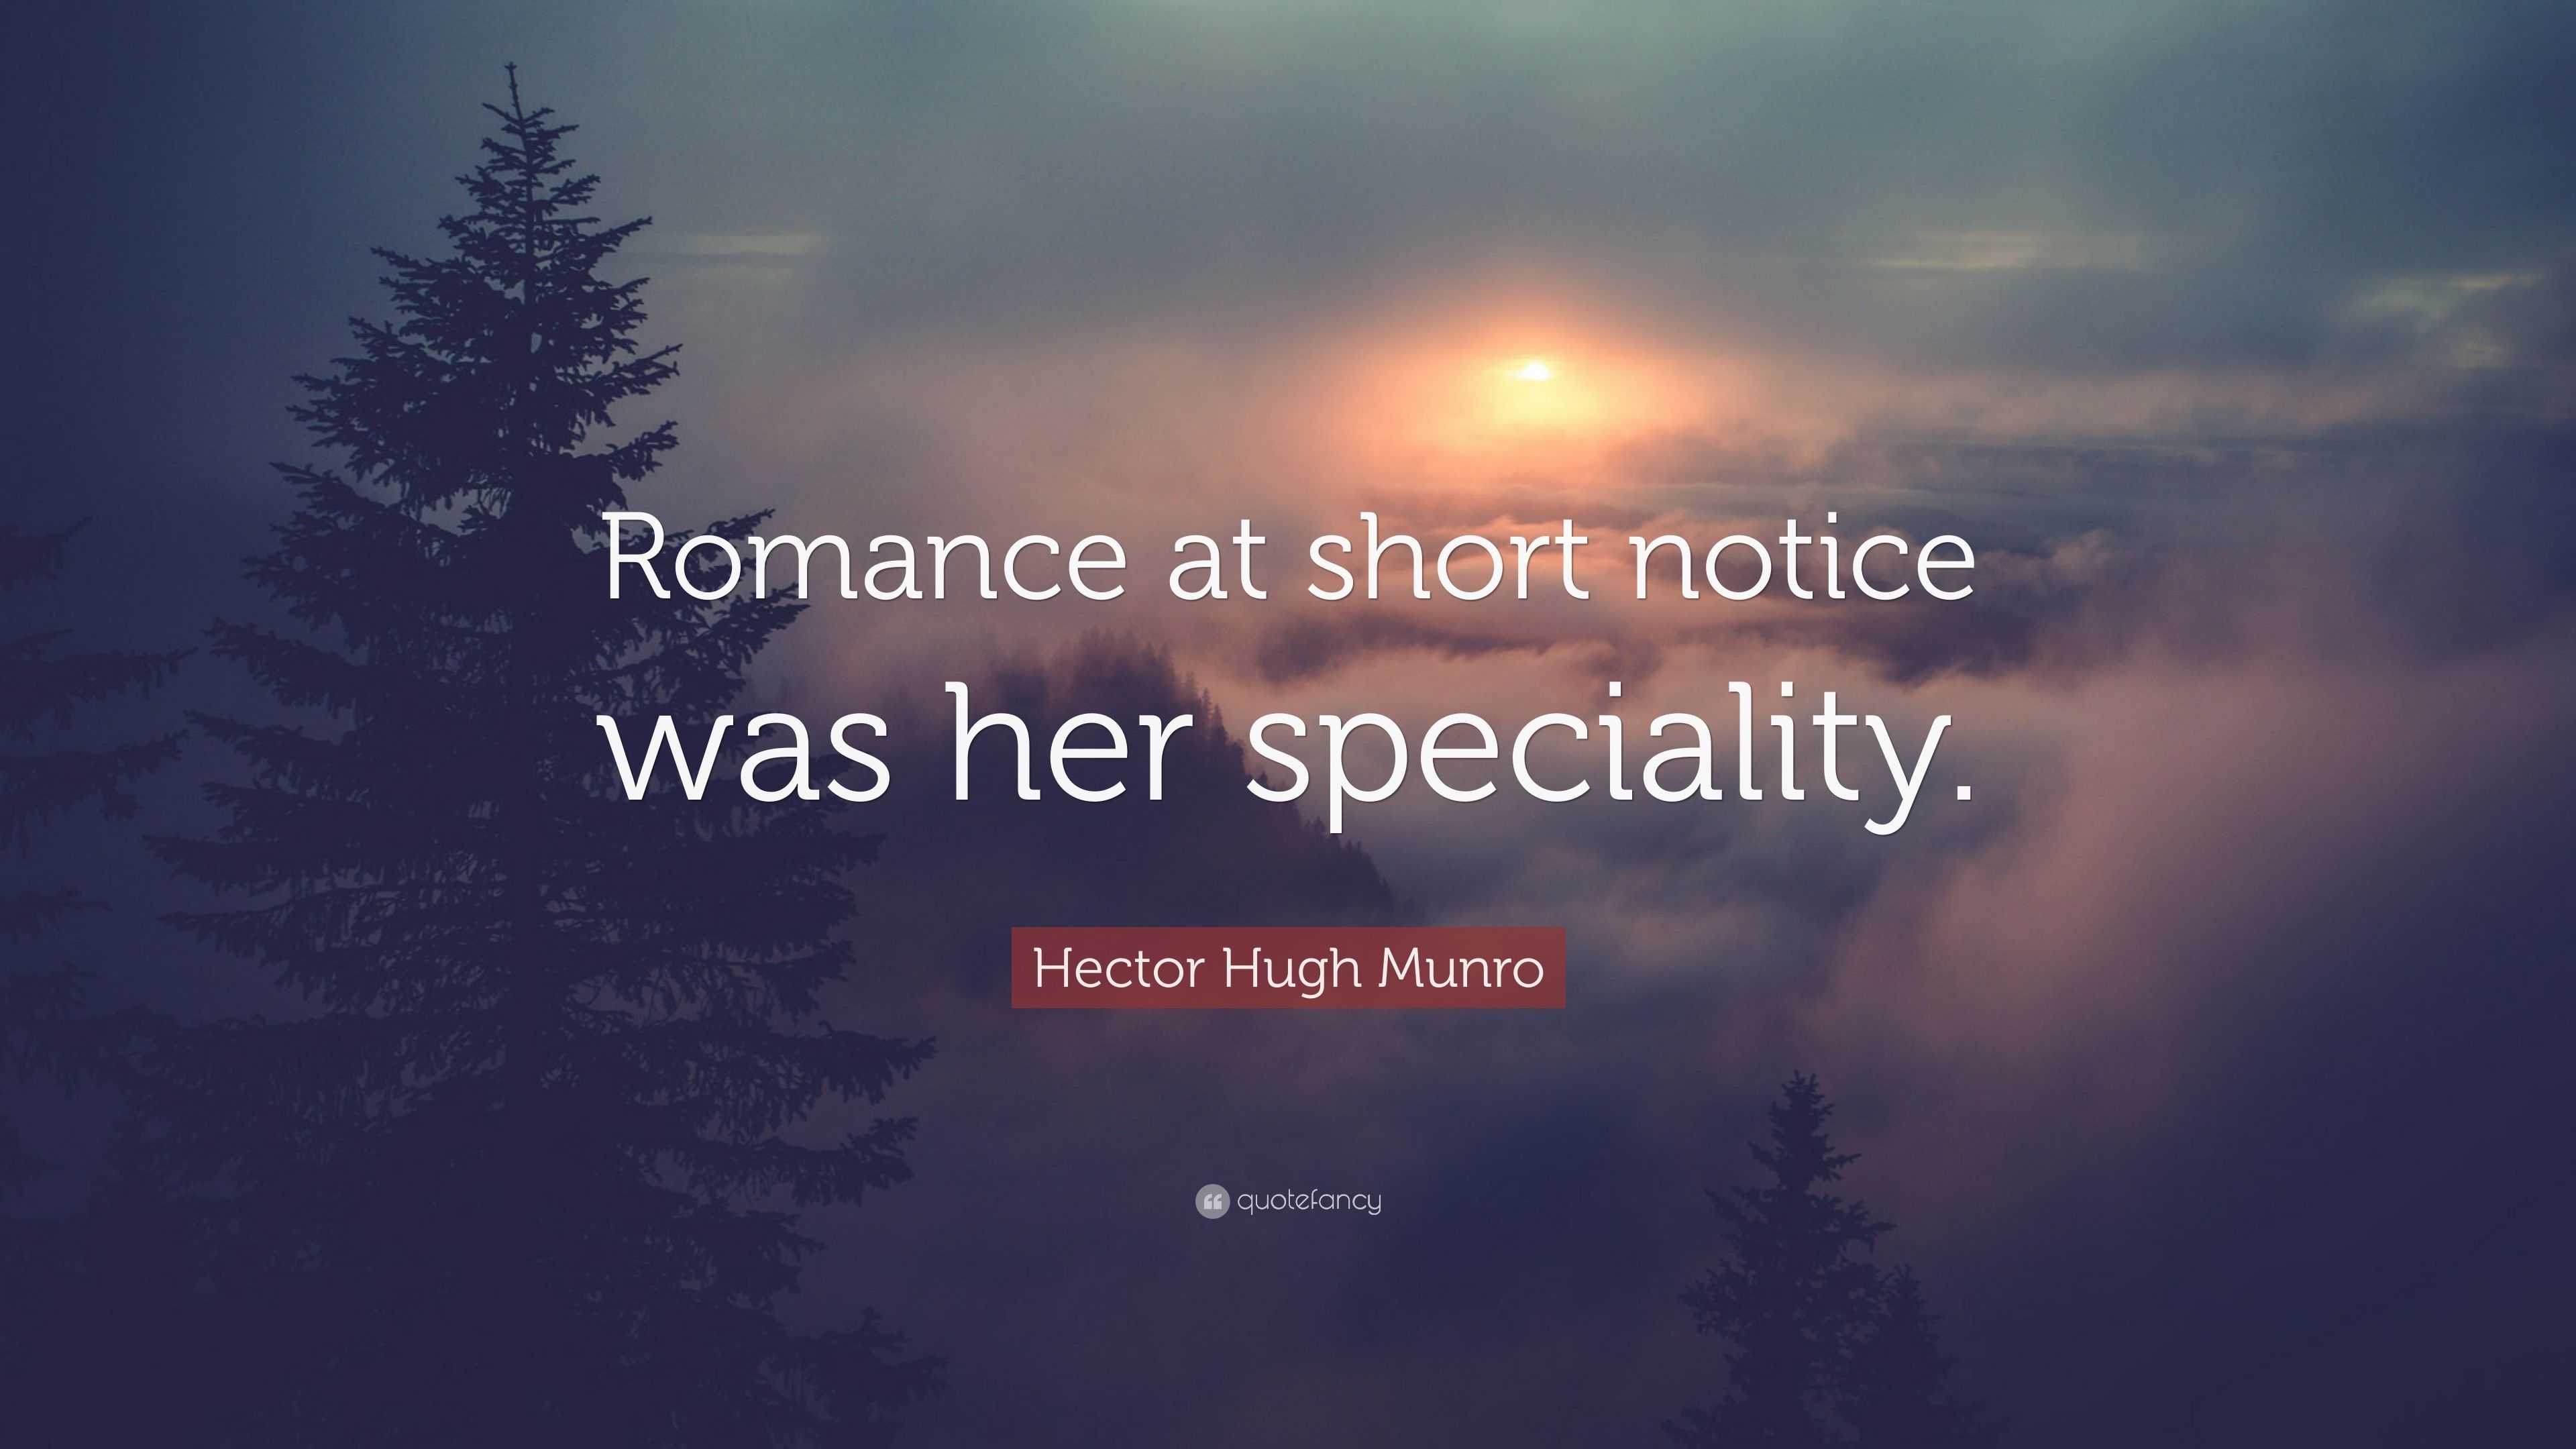 romance at short notice was her specialty meaning